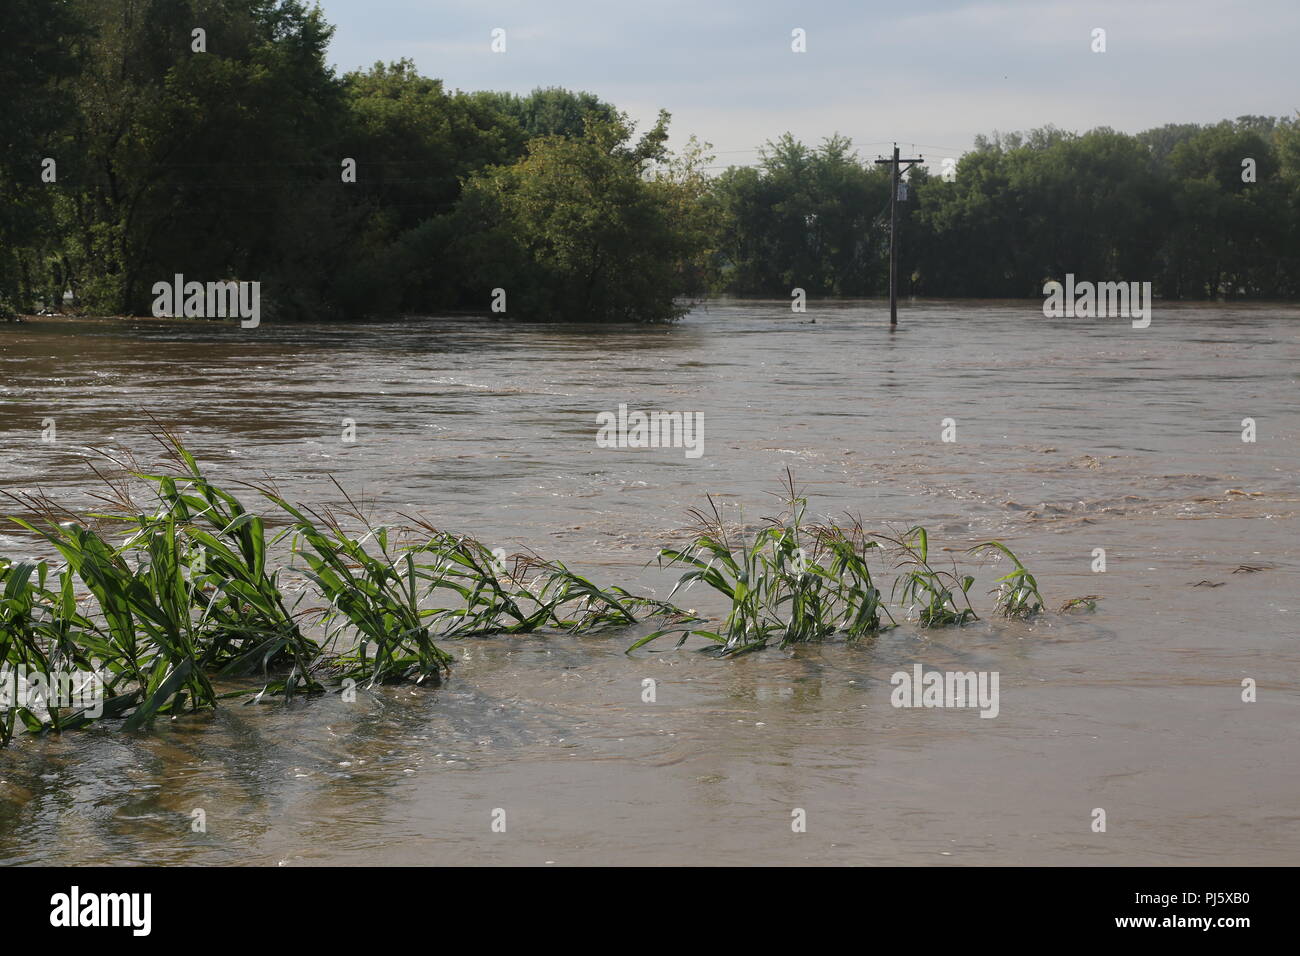 An area of Leon, Wis., shows flooding Aug, 28, 2018 in Monroe County, Wis. Firefighters with the Directorate of Emergency Services Fire Department at Fort McCoy, Wis., helped with rescue operations for the flooding. On Aug. 27 to early Aug. 28, 2018, 5-12 inches of rain fell on several areas of Monroe County, causing flash flooding and stranding residents in flooded areas. Fort McCoy firefighters helped with the rescue of people in the affected areas. (U.S. Army Photo by Scott T. Sturkol, Public Affairs Office, Fort McCoy, Wis.) Stock Photo